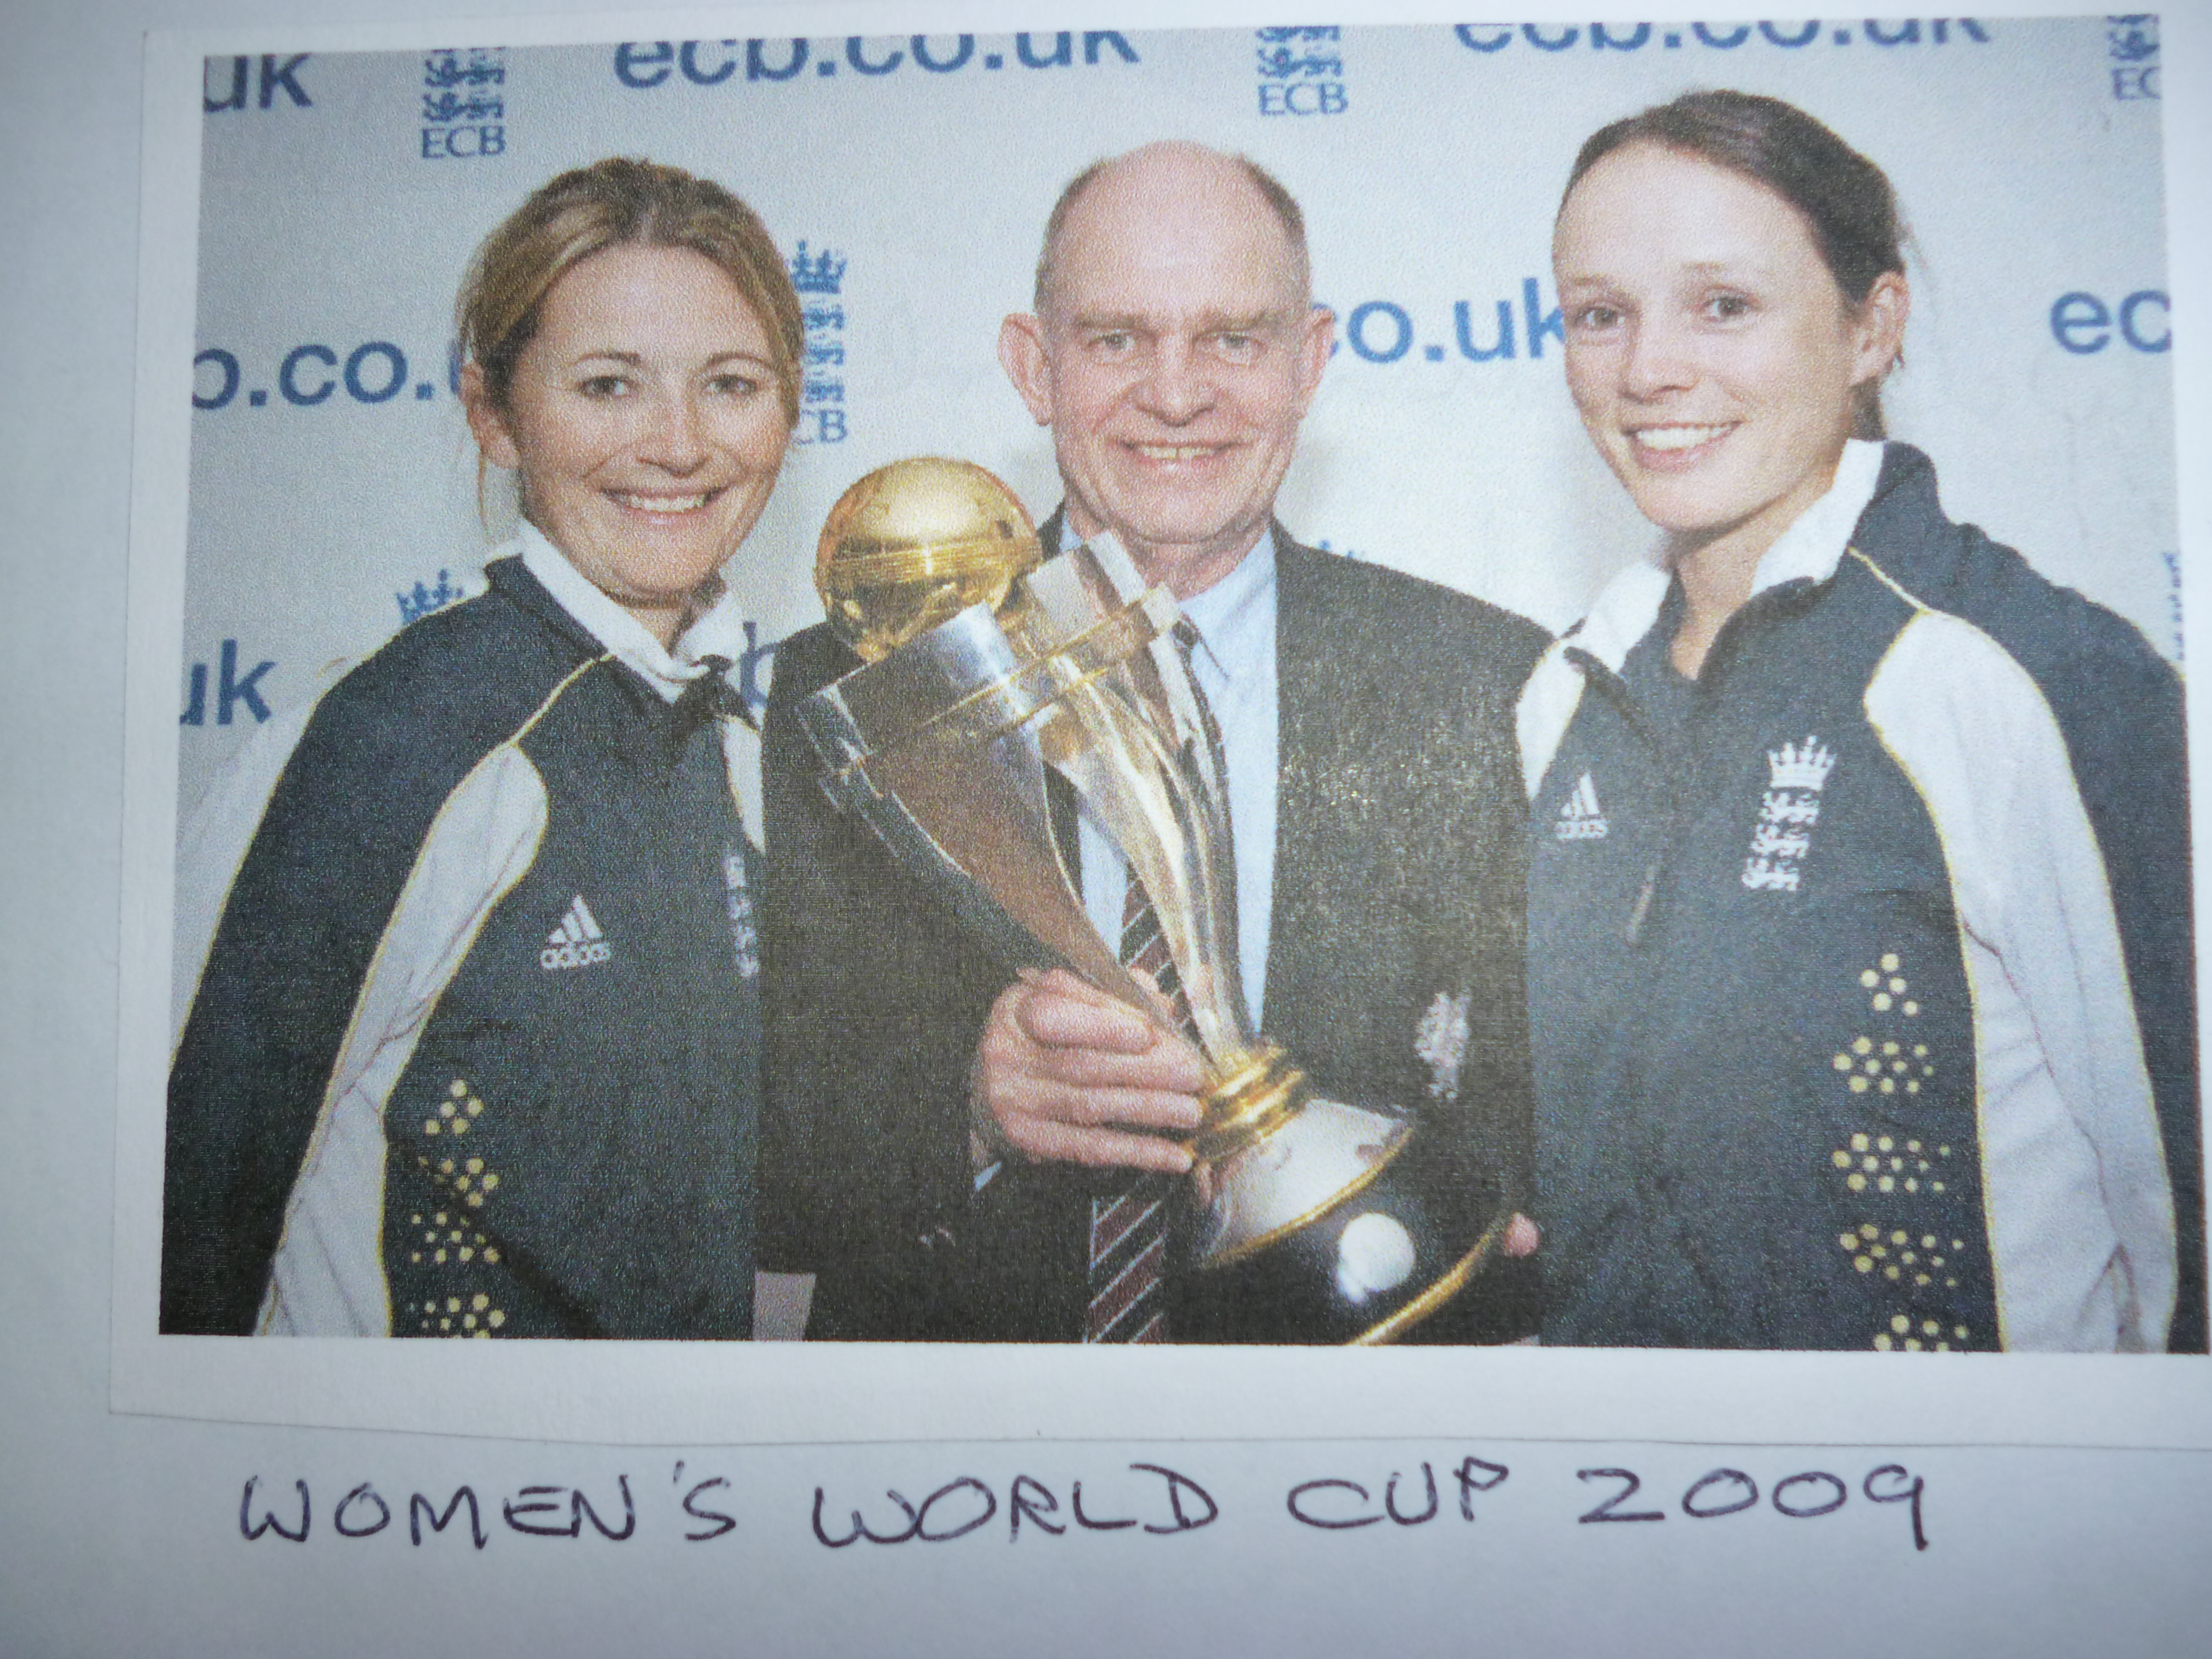 Charlotte Edwards and Caroline Atkins together with the Women's World Cup when England beat New Zealand in 2009